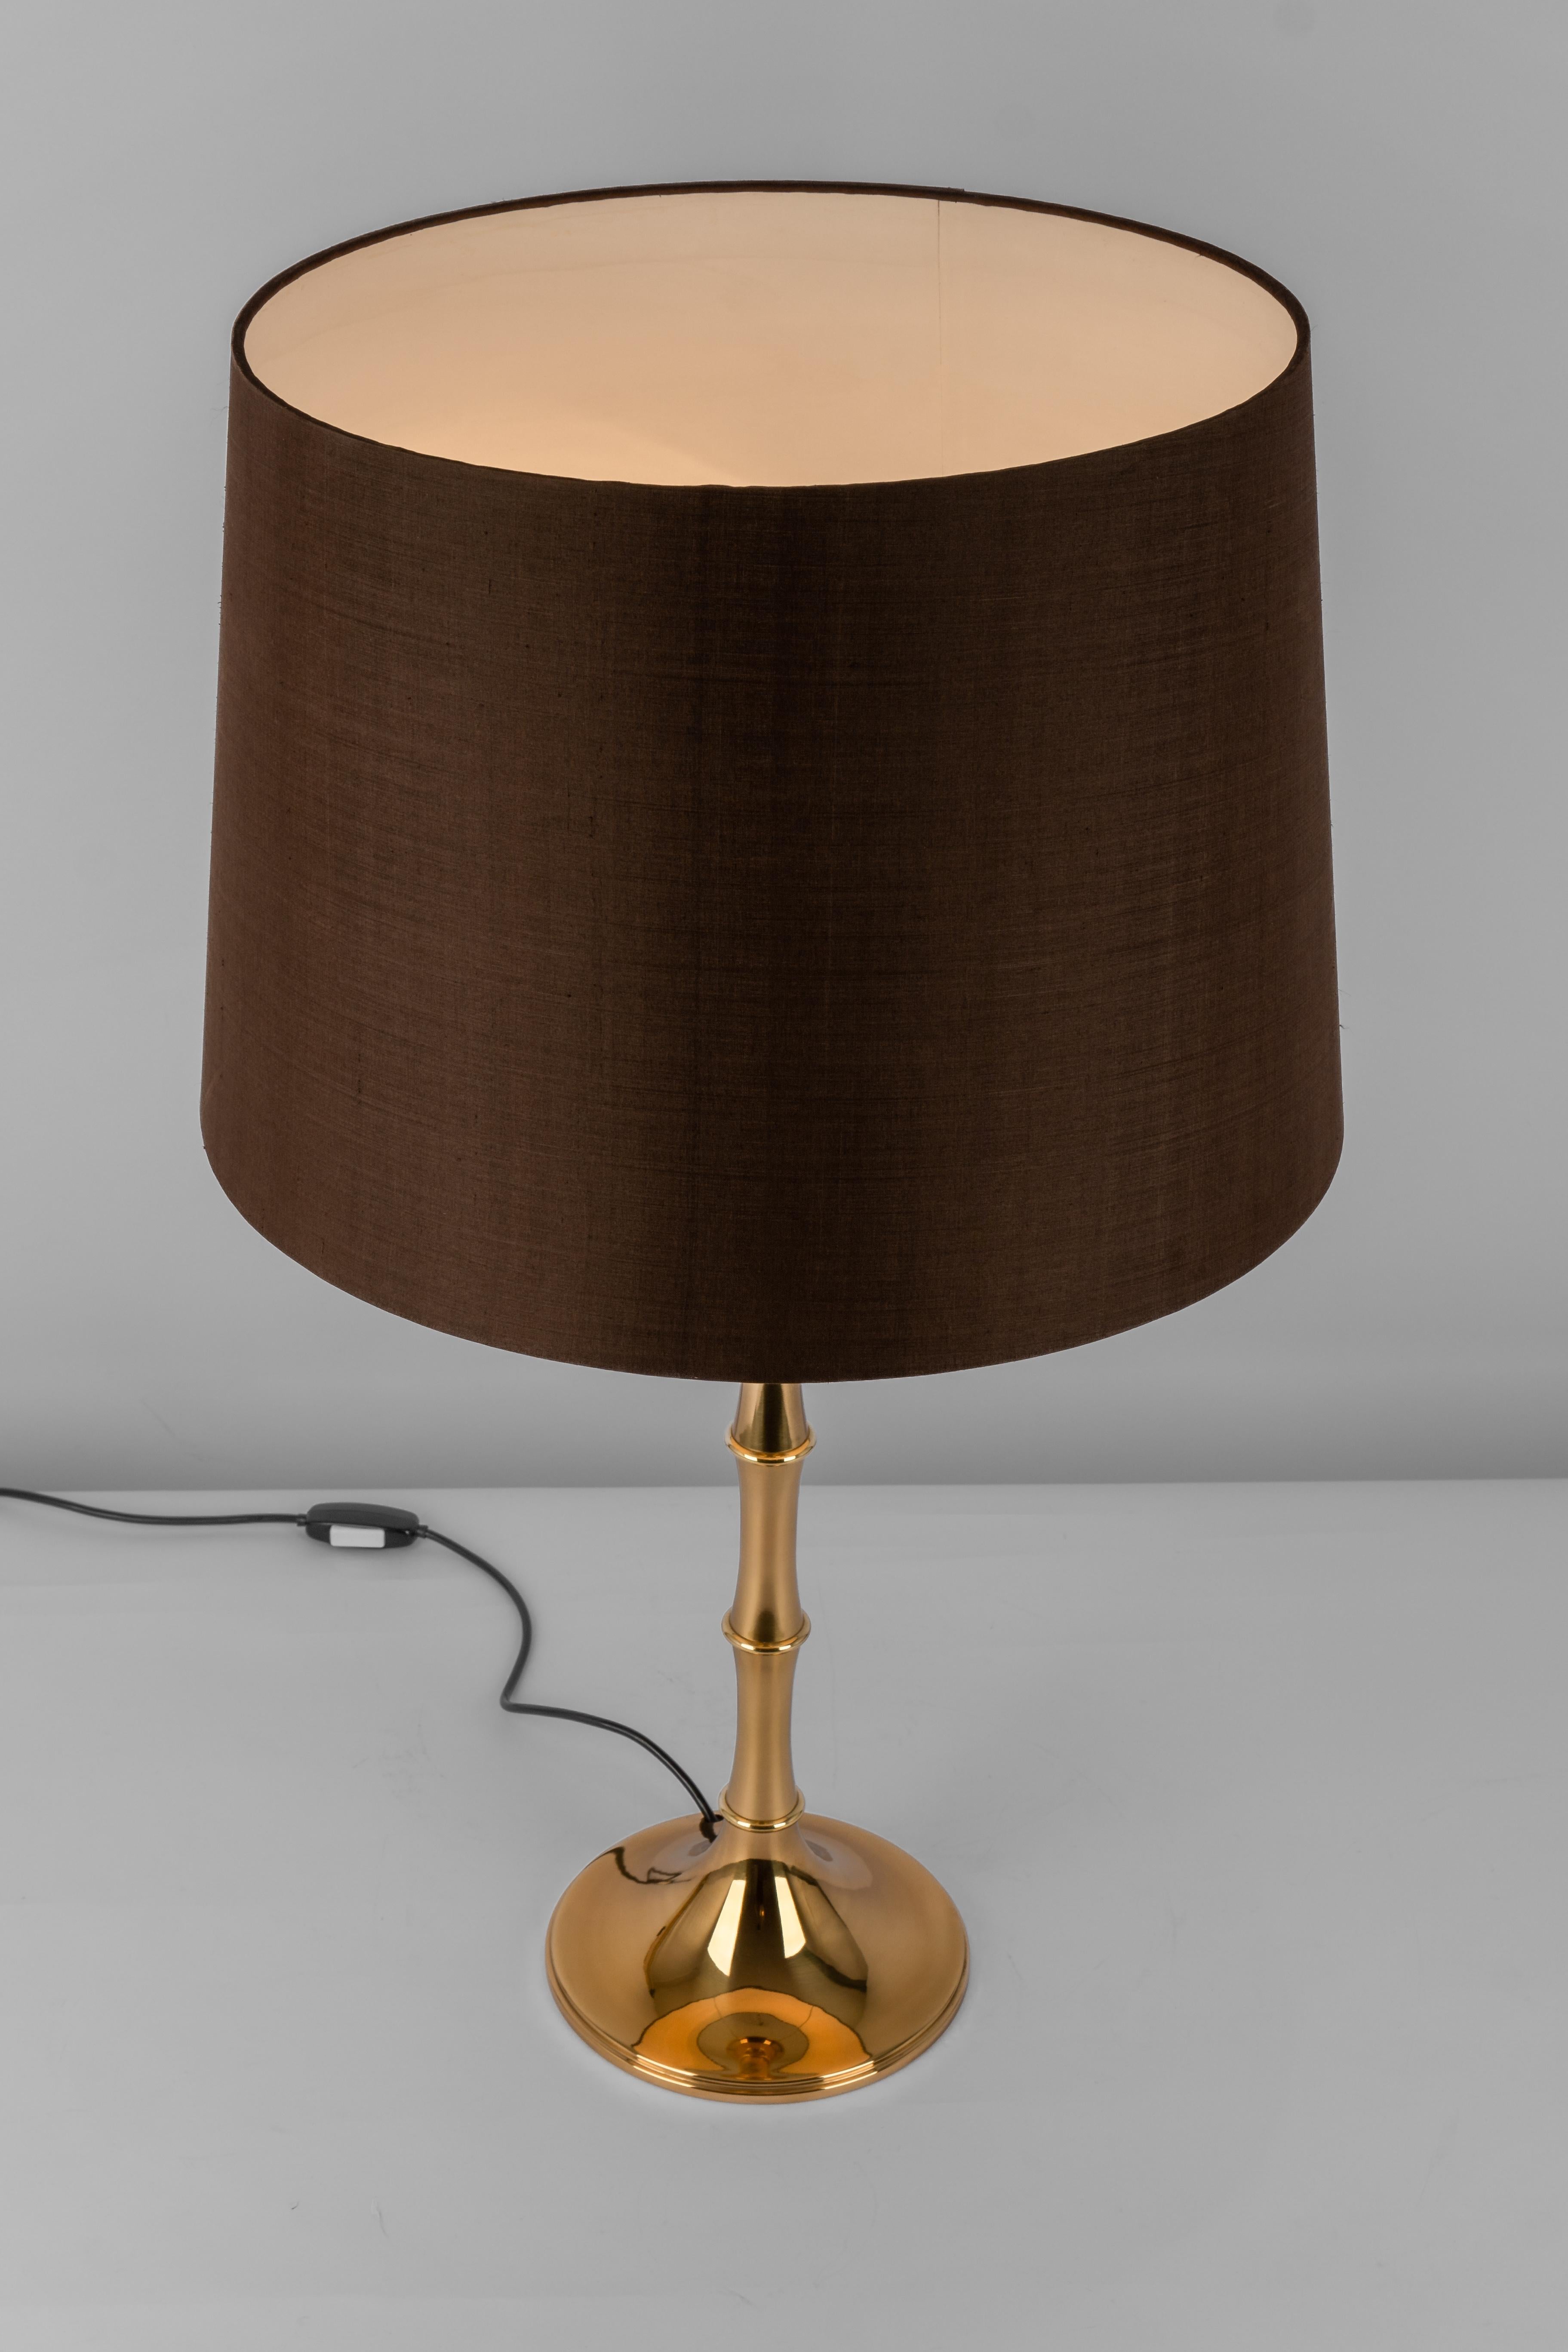 Pair of Bamboo Table Lamps by Ingo Maurer, Germany, 1970s For Sale 5